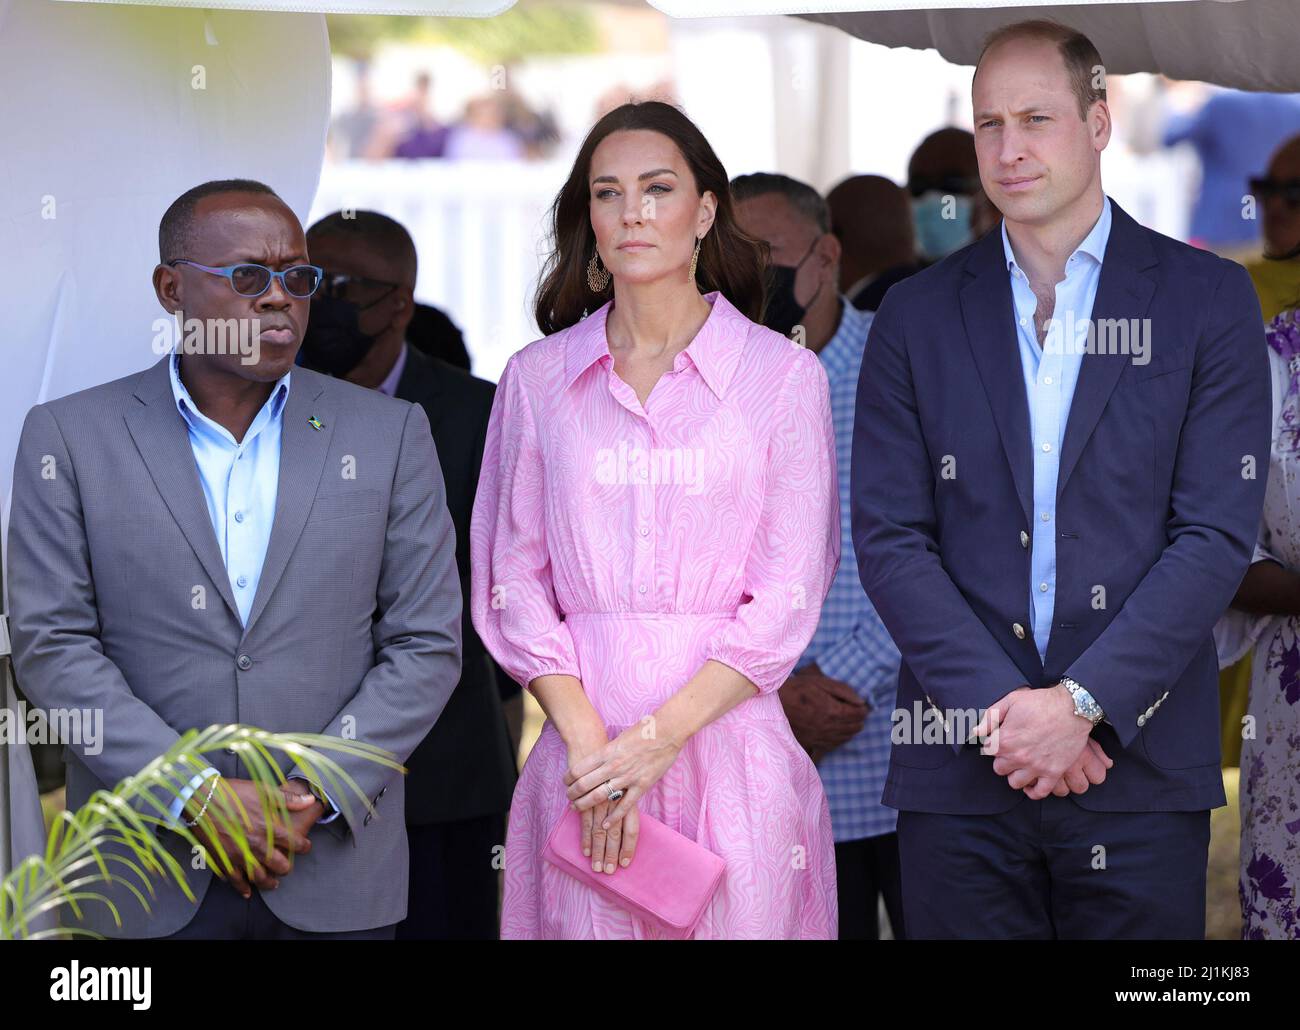 The Duke and Duchess of Cambridge during a visit to the Memorial Wall to remember victims of the 2019 hurricane at the Memorial Garden in Abaco, on day eight of their tour of the Caribbean on behalf of the Queen to mark her Platinum Jubilee. Abaco, a chain of islands and barrier cays in the northern Bahamas, was hit by winds of up to 185mph during Hurricane Dorian in 2019 leaving 75% of homes across the chain of islands damaged and resulting in tragic loss of life. Picture date: Saturday March 26, 2022. Stock Photo